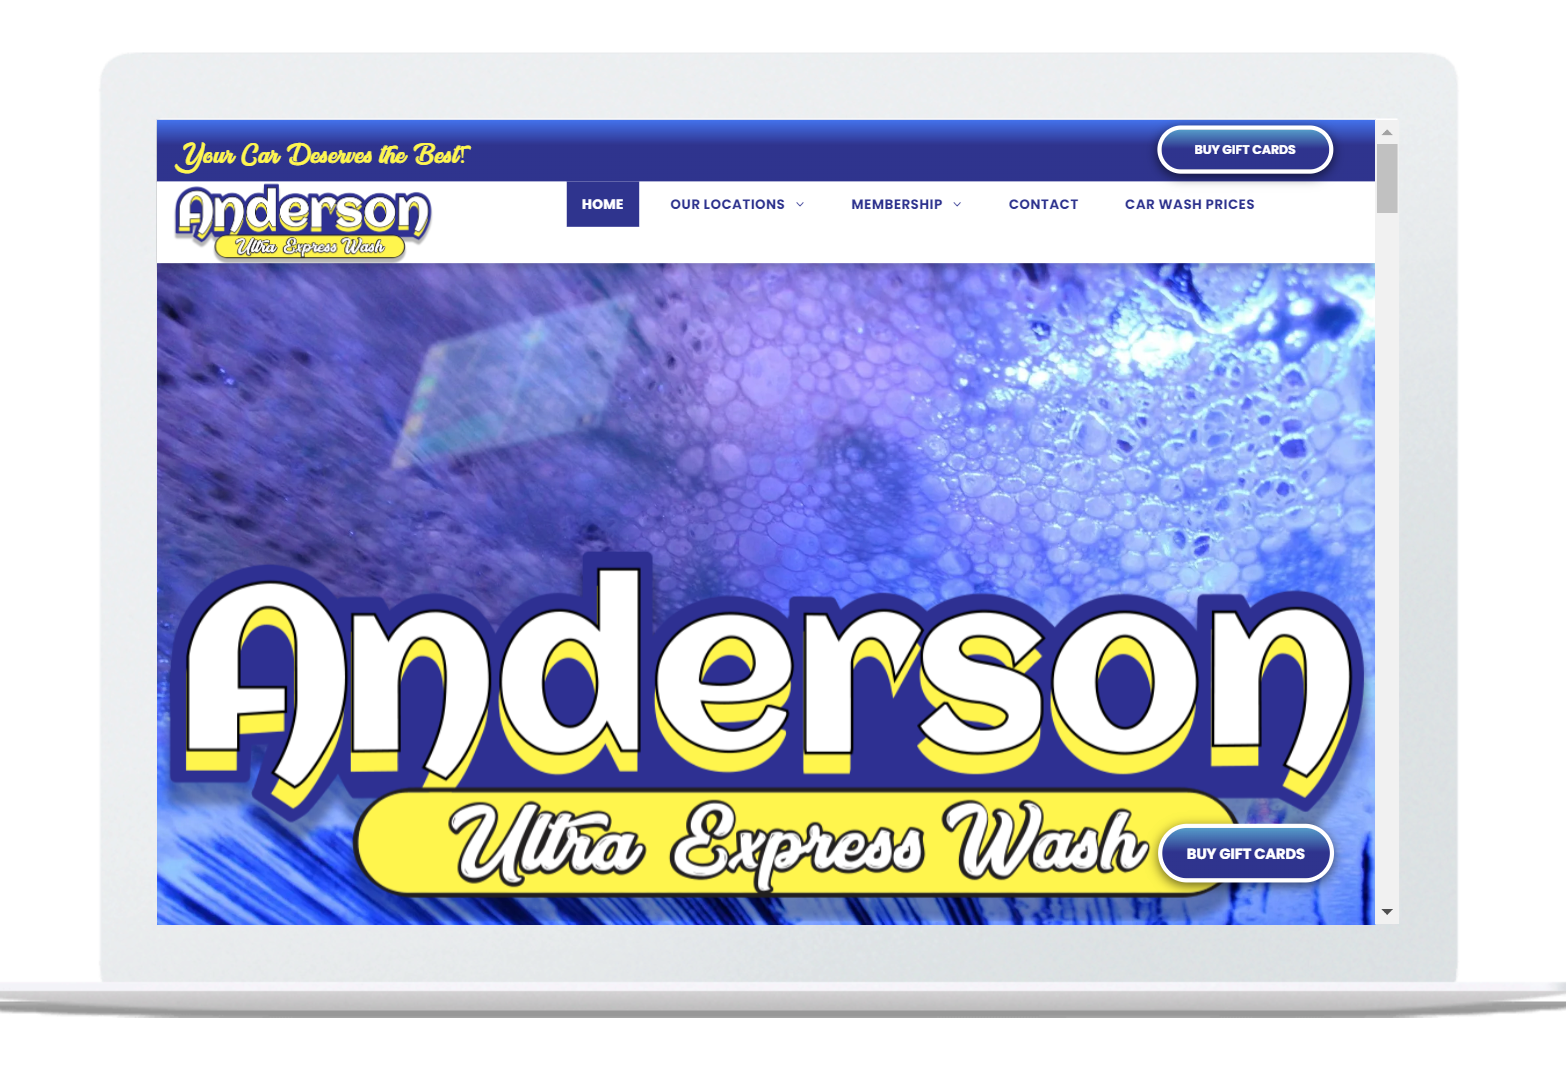 anderson carwash website carwash websites made by OhmCo, the best carwash websites in the wash and water treatment industry